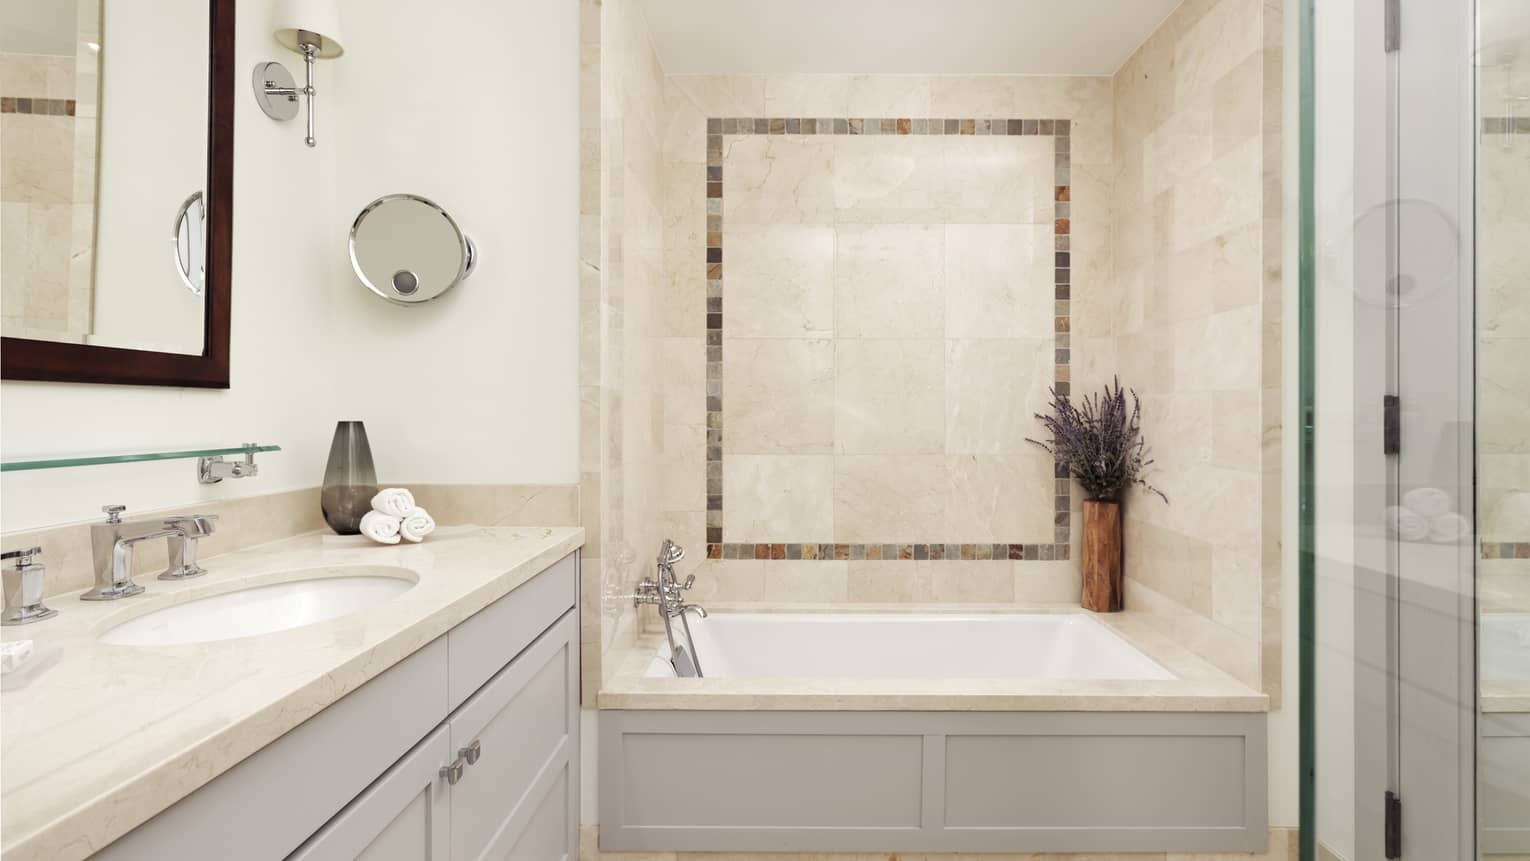 A private Vail residence bathroom has a white stone tile shower with a white porcelain tub and a glass walk-in shower